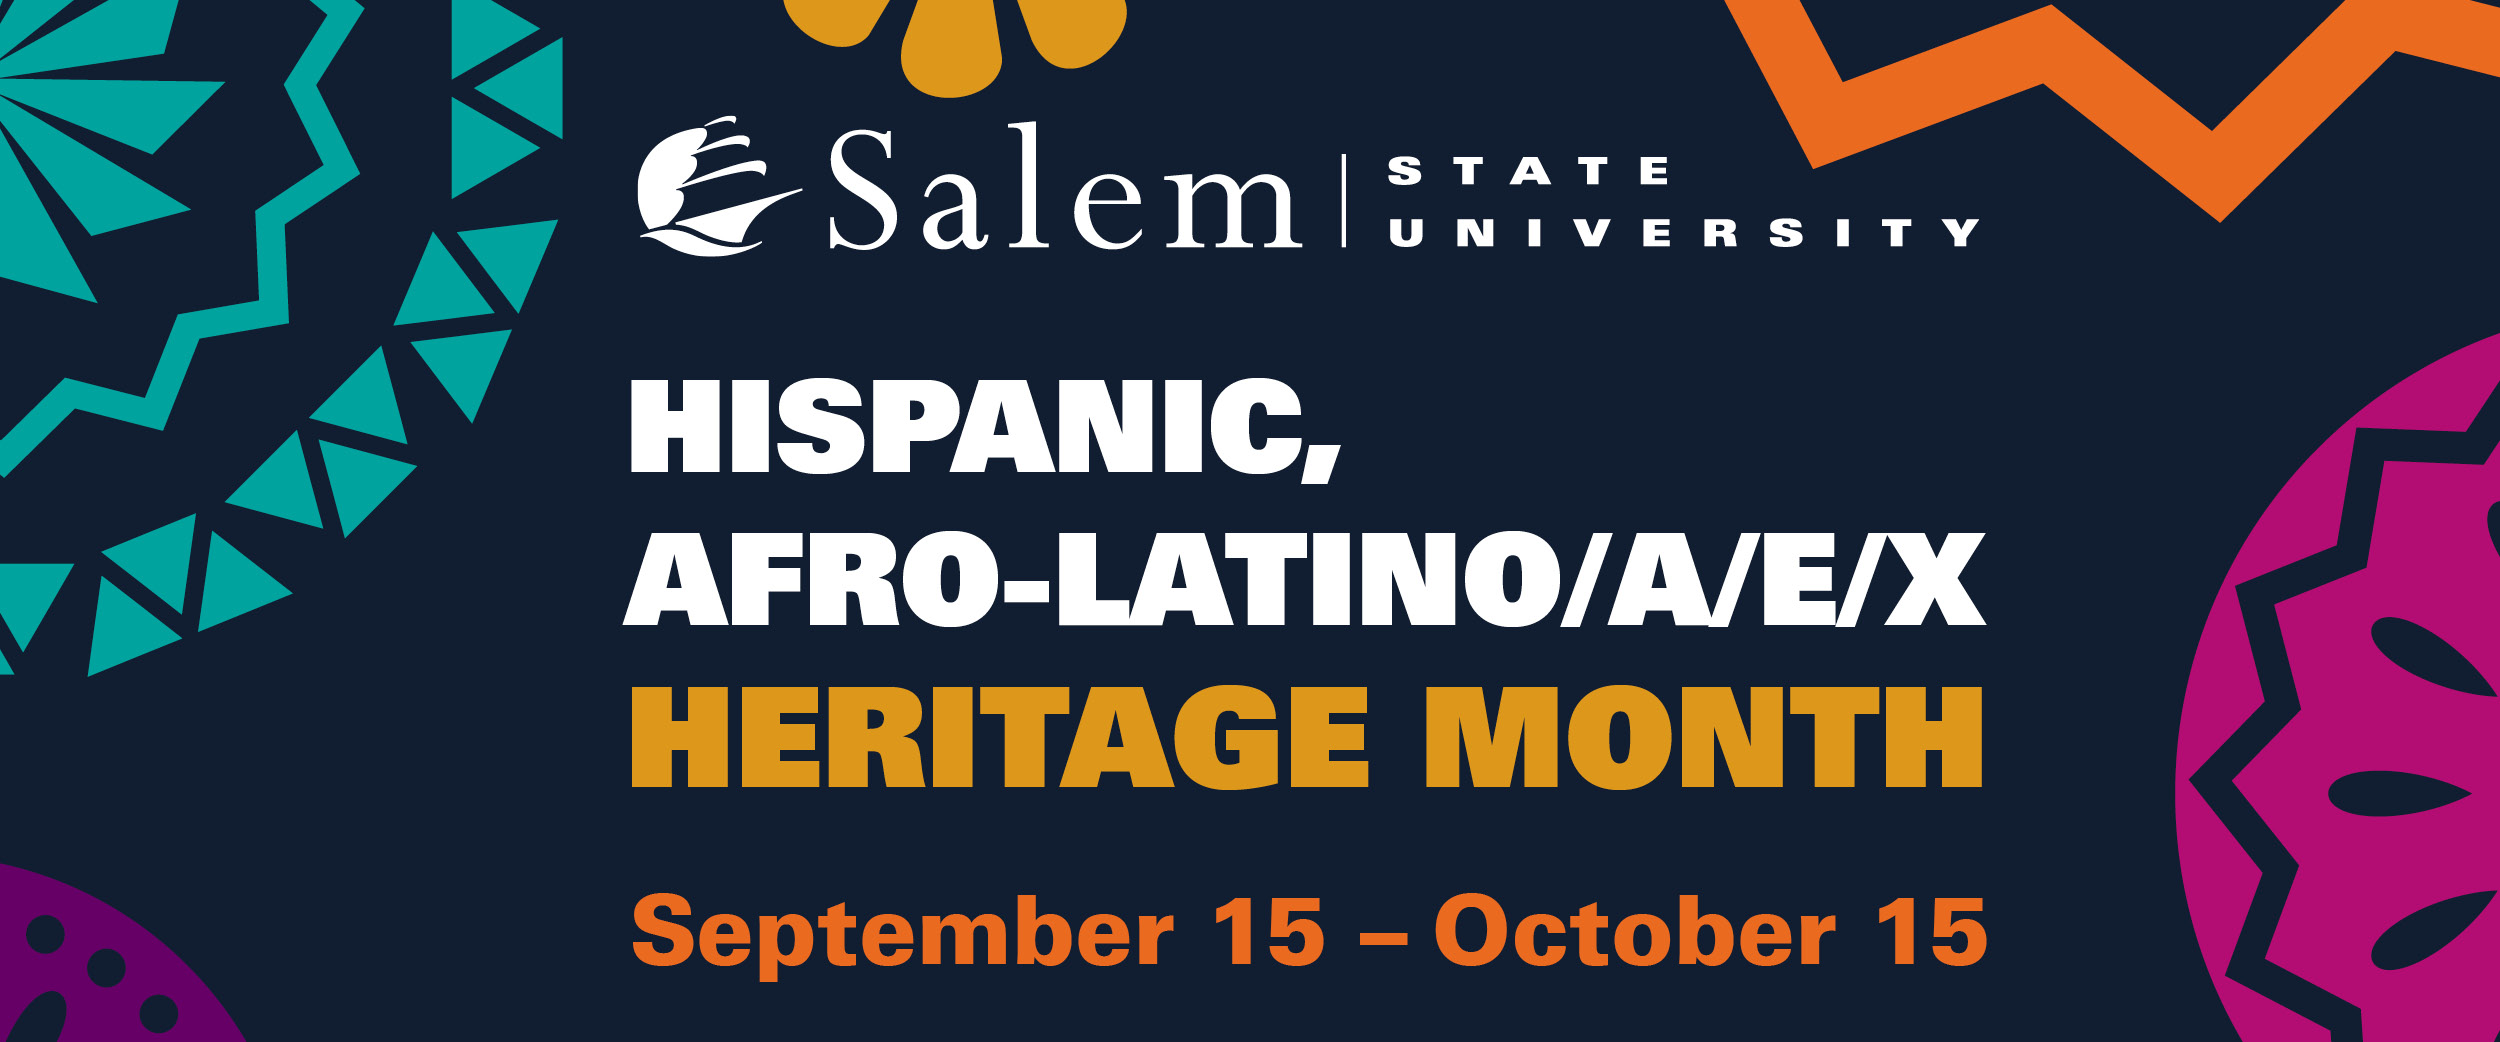 Afro-Latino/a/e/x Heritage Month graphic with the Salem State logo and "September 15-October 15" text.